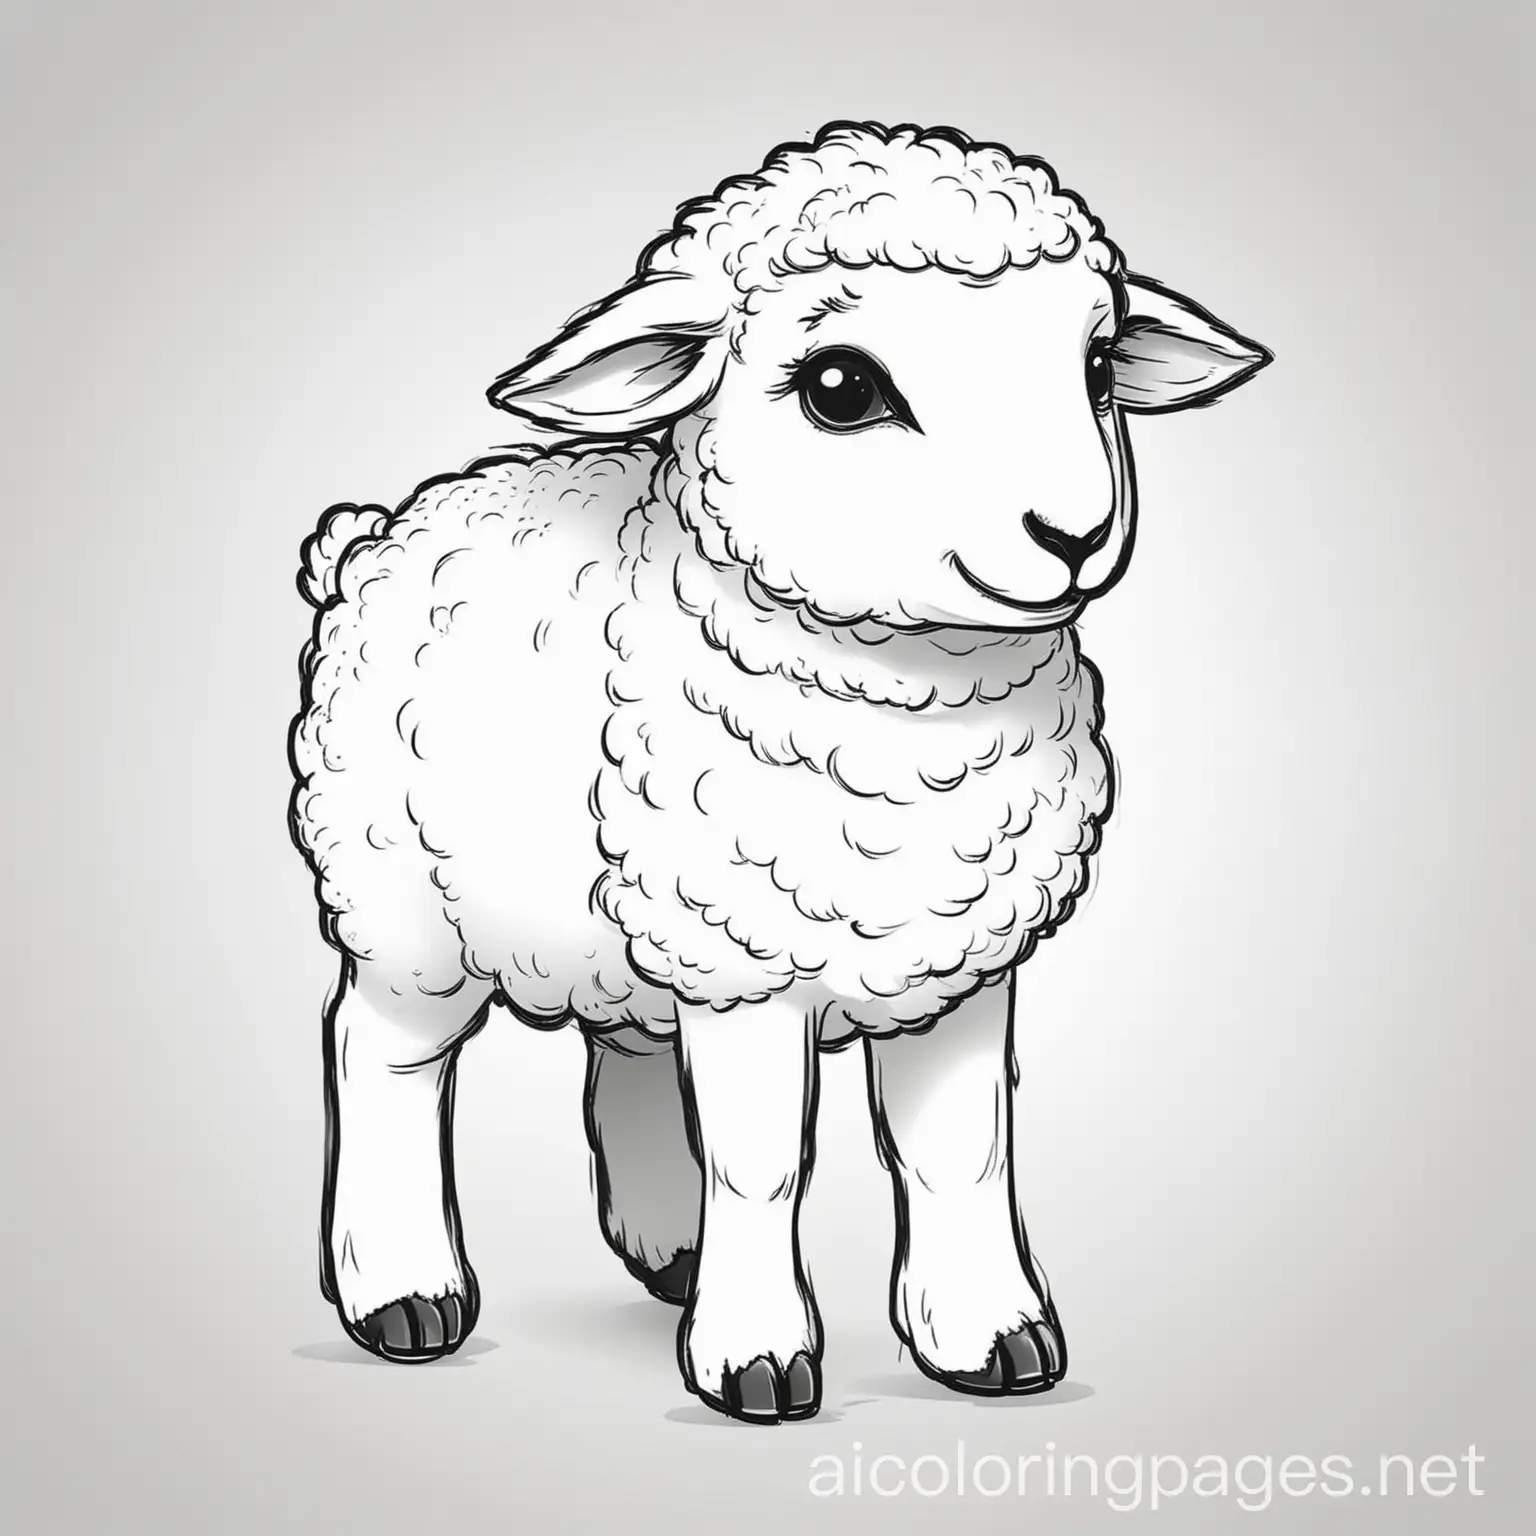 baby sheep, Coloring Page, black and white, line art, white background, Simplicity, Ample White Space, Coloring Page, black and white, line art, white background, Simplicity, Ample White Space, The background of the coloring page is plain white to make it easy for young children to color within the lines. The outlines of all the subjects are easy to distinguish, making it simple for kids to color without too much difficulty, Coloring Page, black and white, line art, white background, Simplicity, Ample White Space, The background of the coloring page is plain white to make it easy for young children to color within the lines. The outlines of all the subjects are easy to distinguish, making it simple for kids to color without too much difficulty